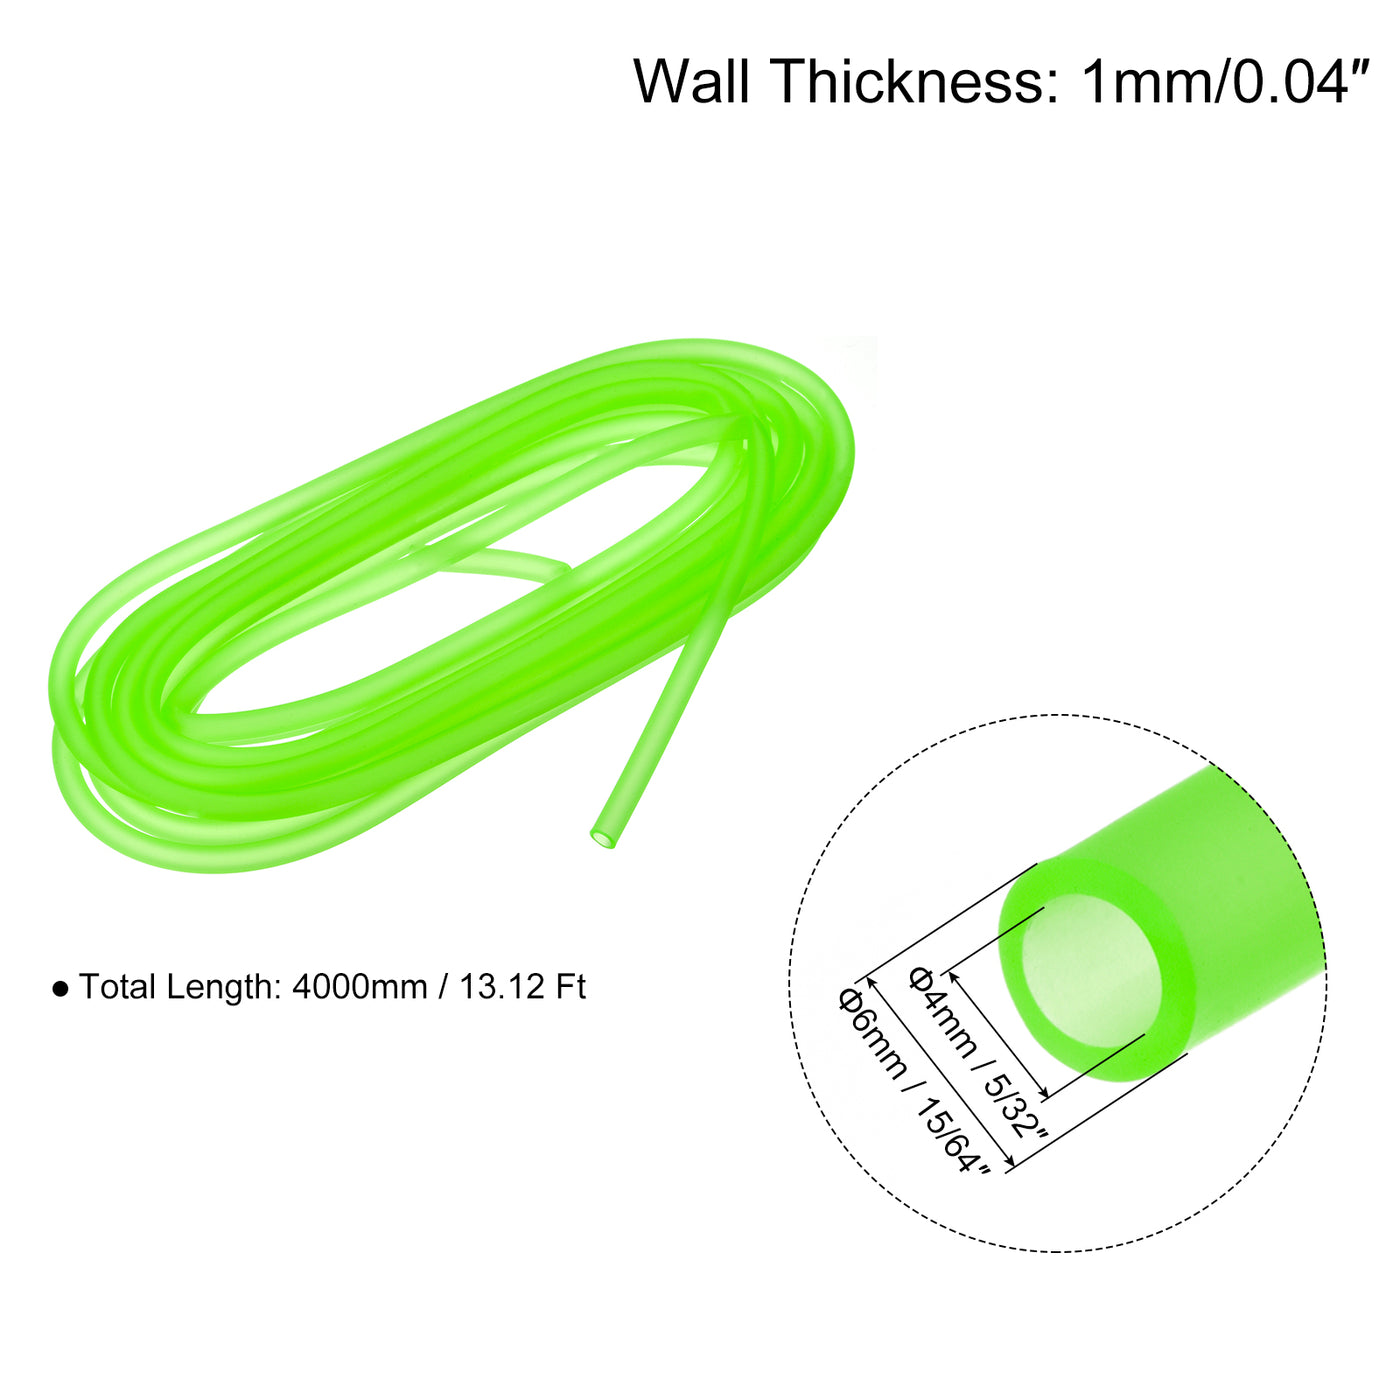 uxcell Uxcell Silicone Tubing 5/32" ID, 15/64" OD 1Pcs 13.12 Ft for Pump Transfer, Green